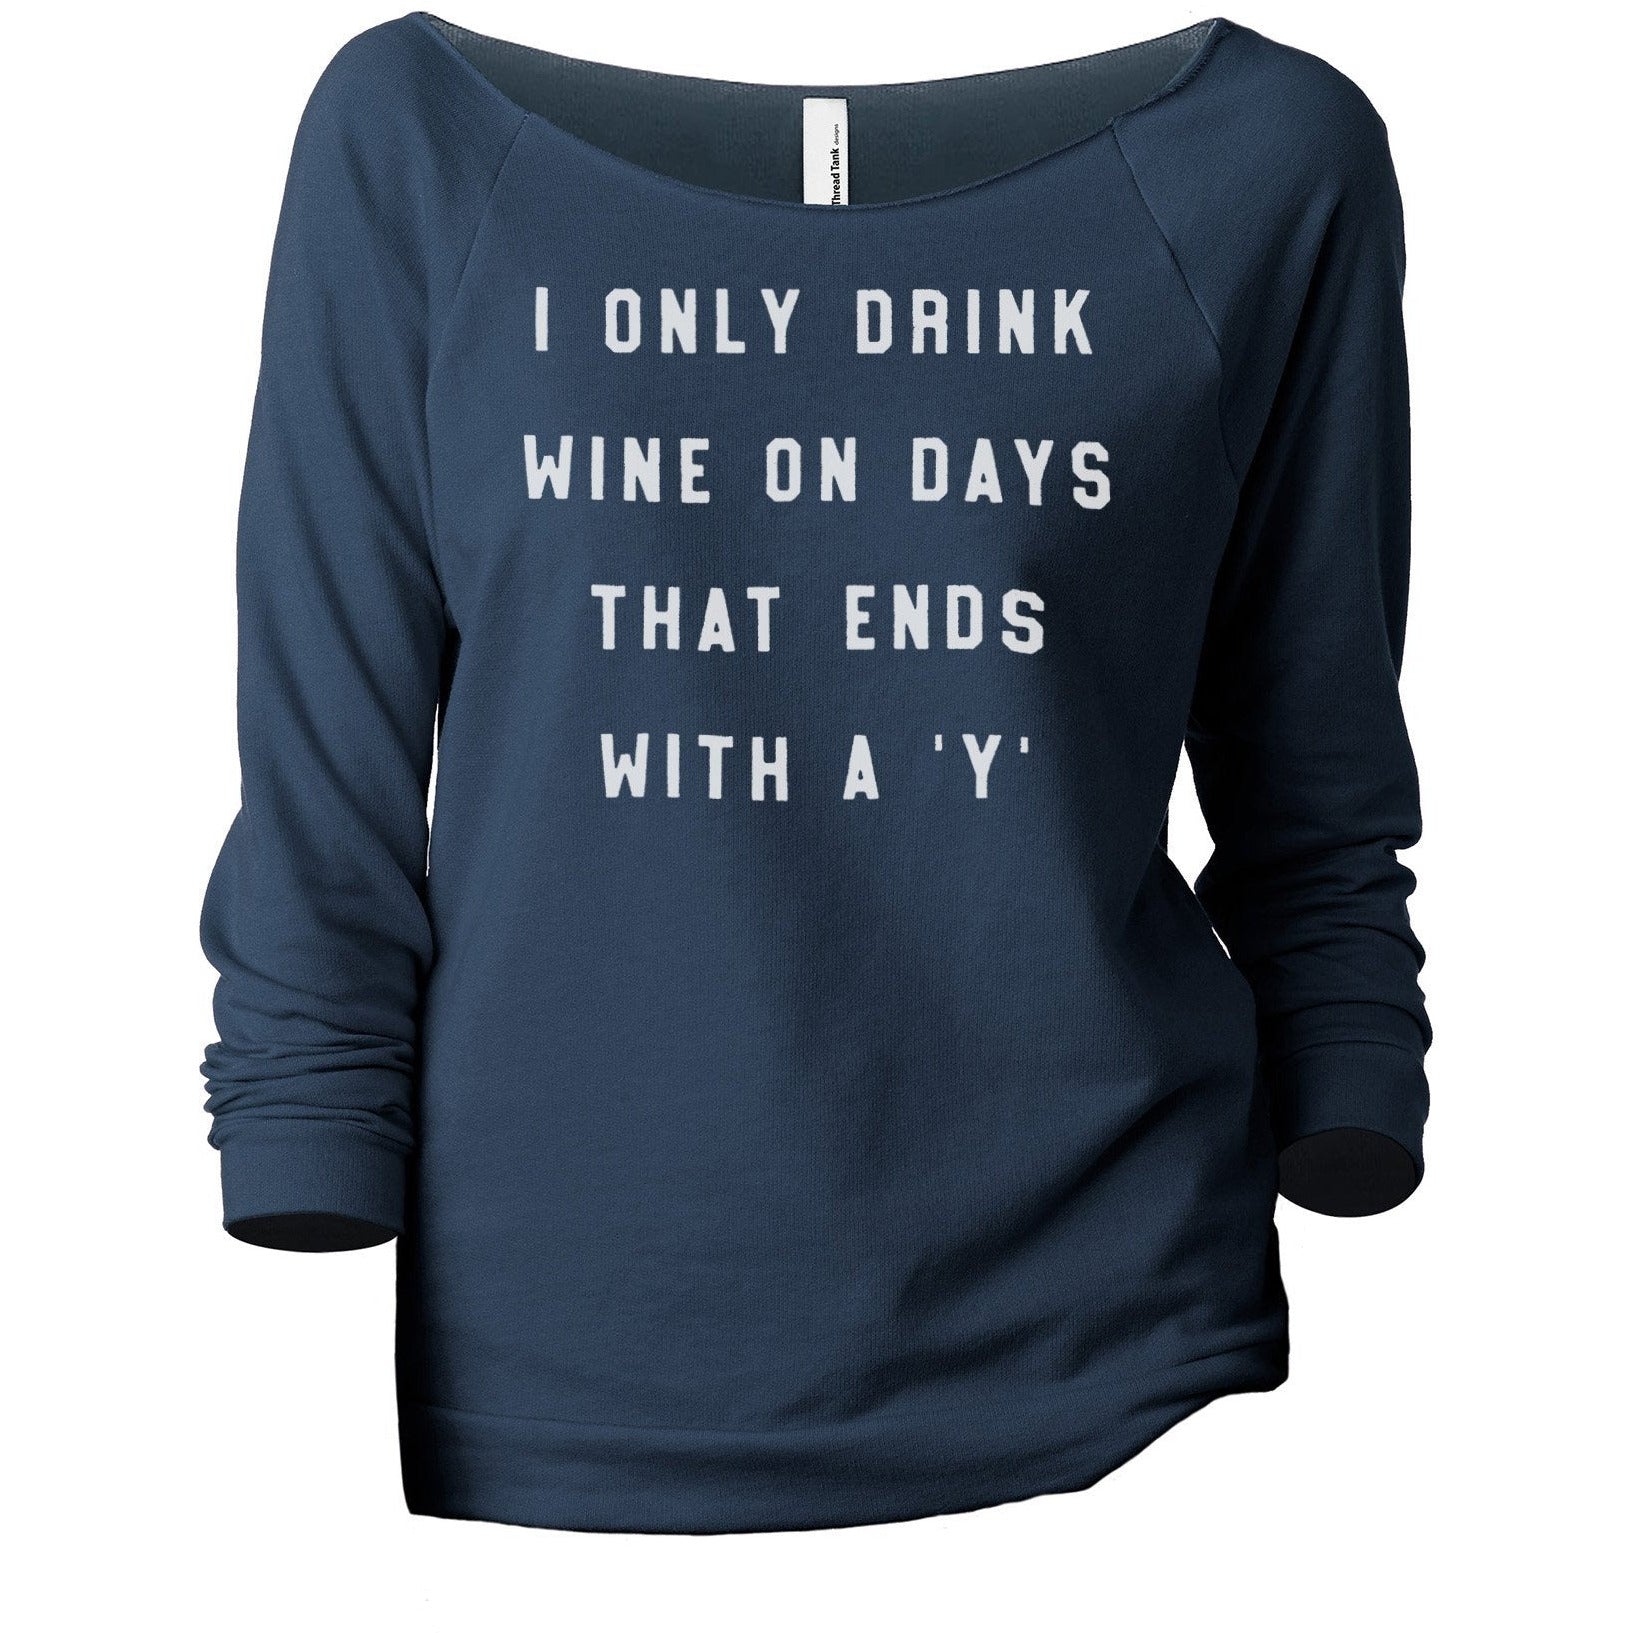 Drink Wine On Days Ends With Y Women's Graphic Printed Lightweight Slouchy 3/4 Sleeves Sweatshirt Navy